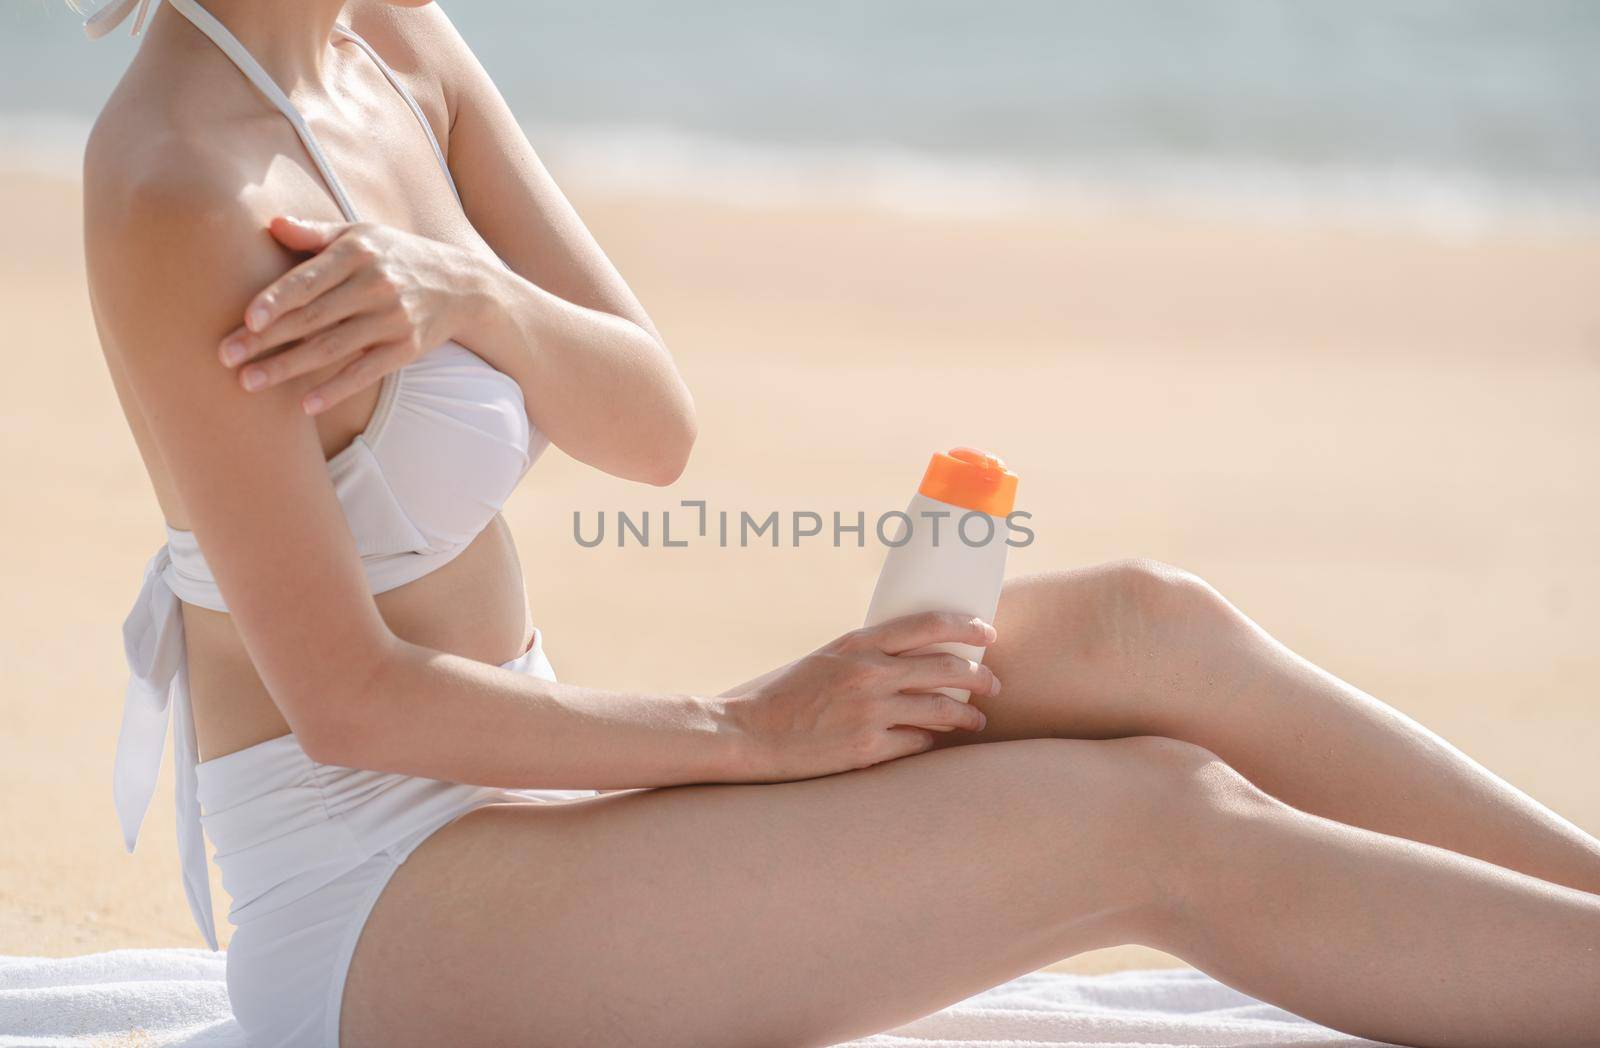 Woman on the beach applying Sunscreen while sitting on towel.